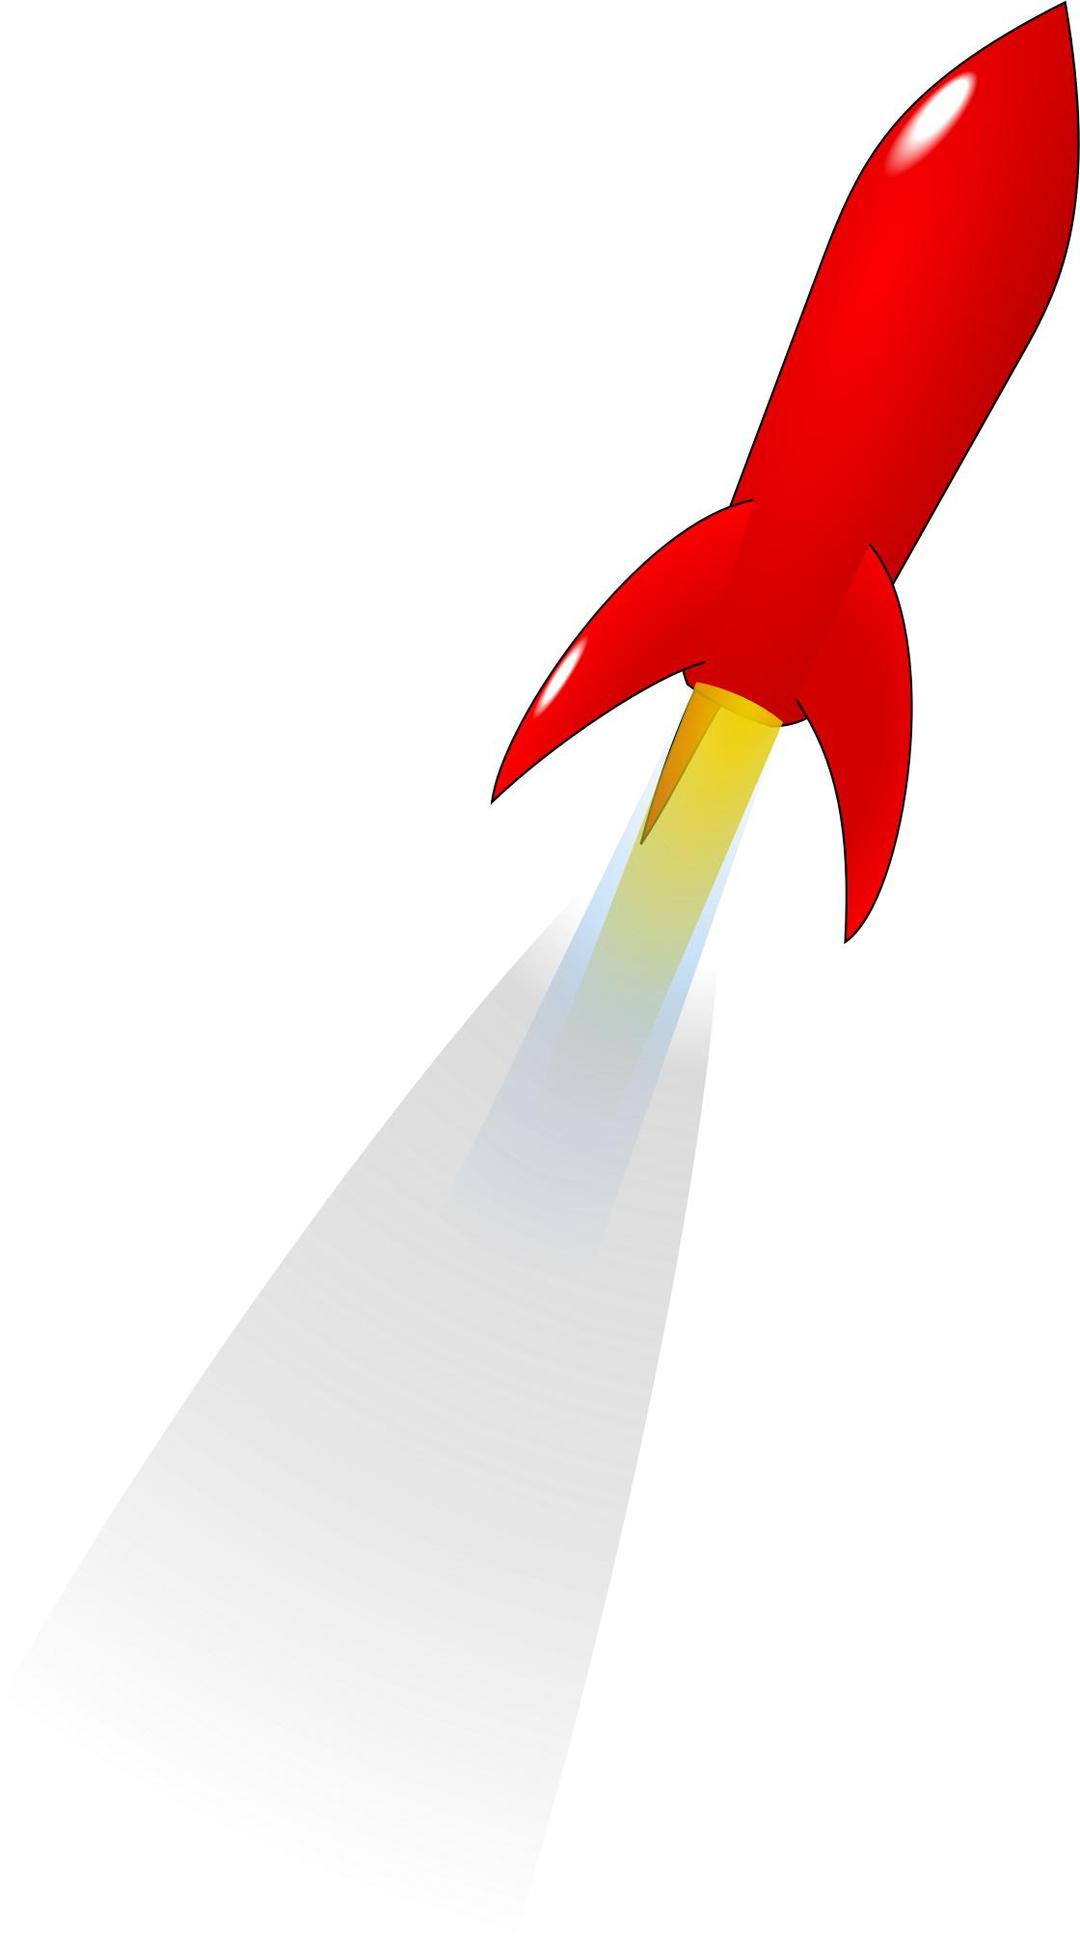 Launching Red Rocket png transparent